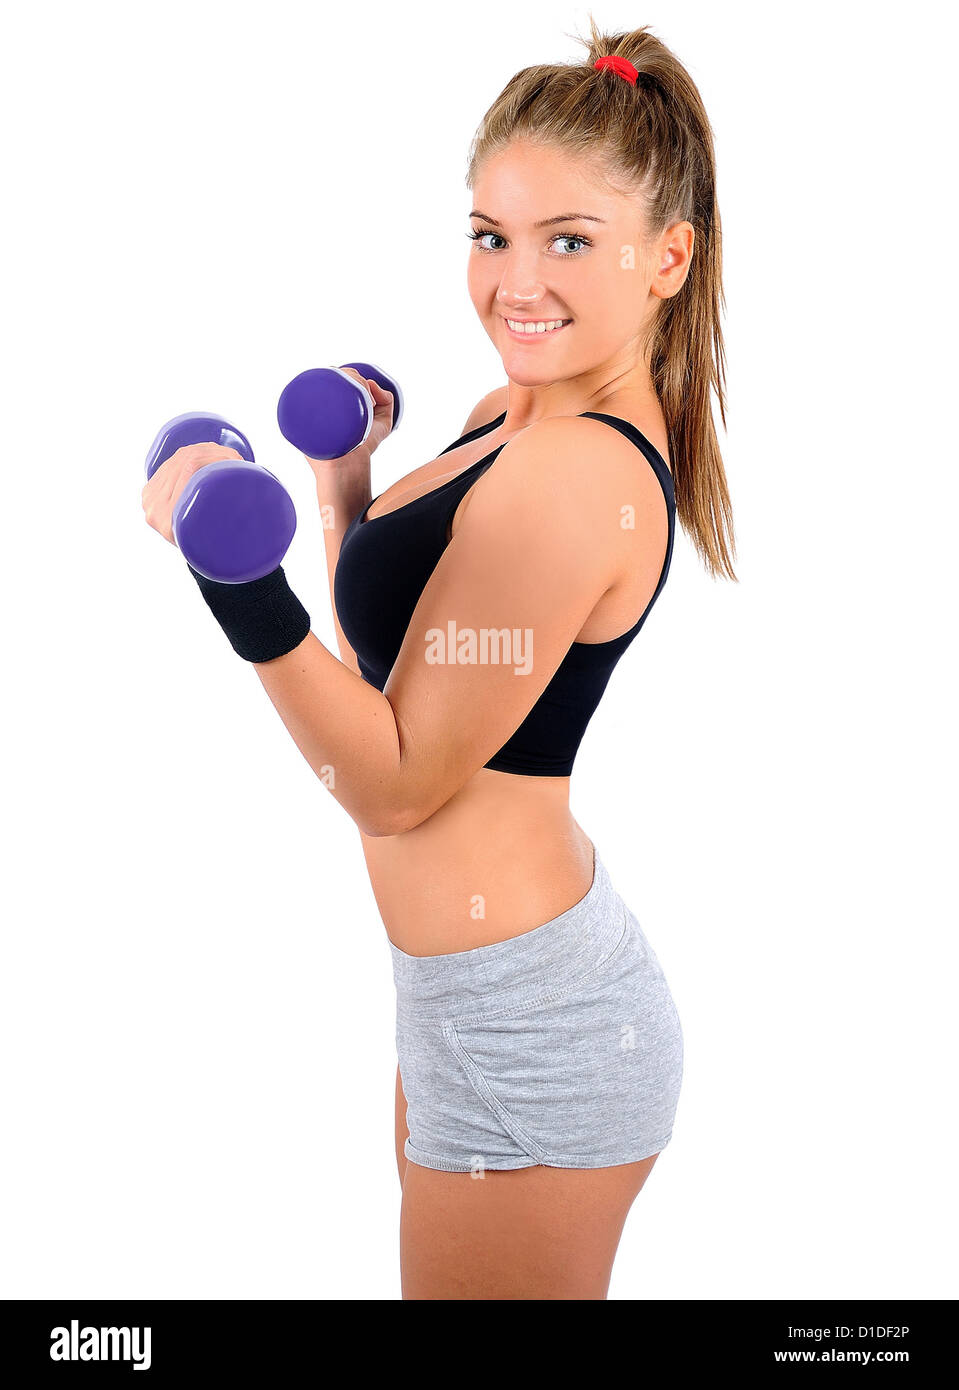 Isolated young fitness woman with dumbbell Stock Photo